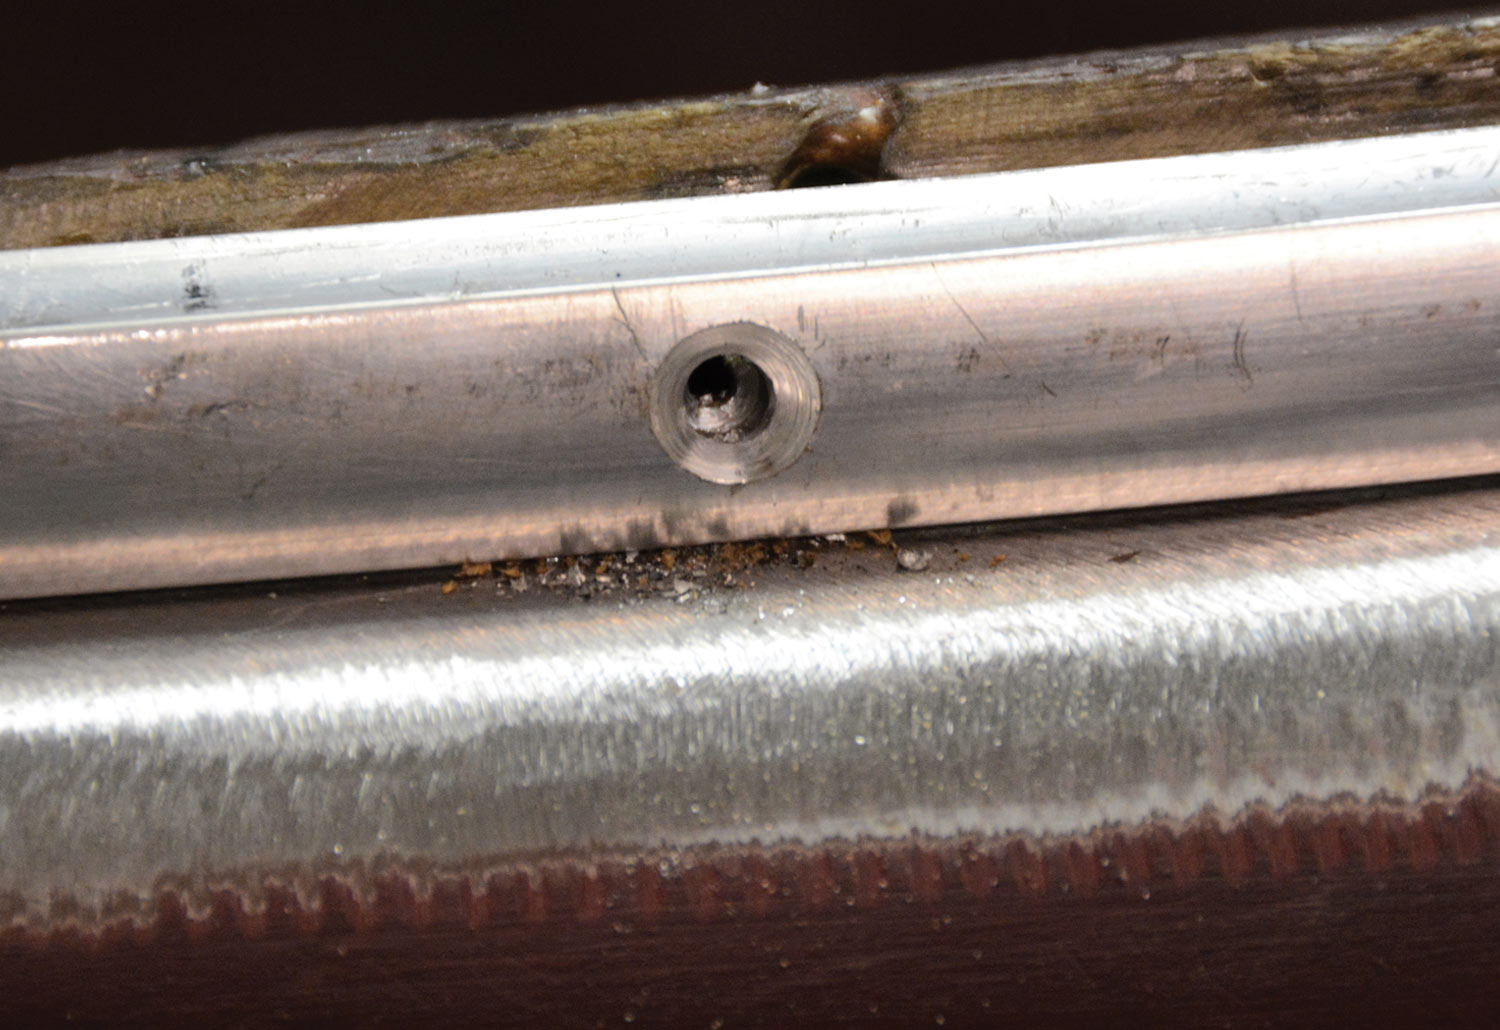 close view of a drilled and countersunk hole on the aluminum trim